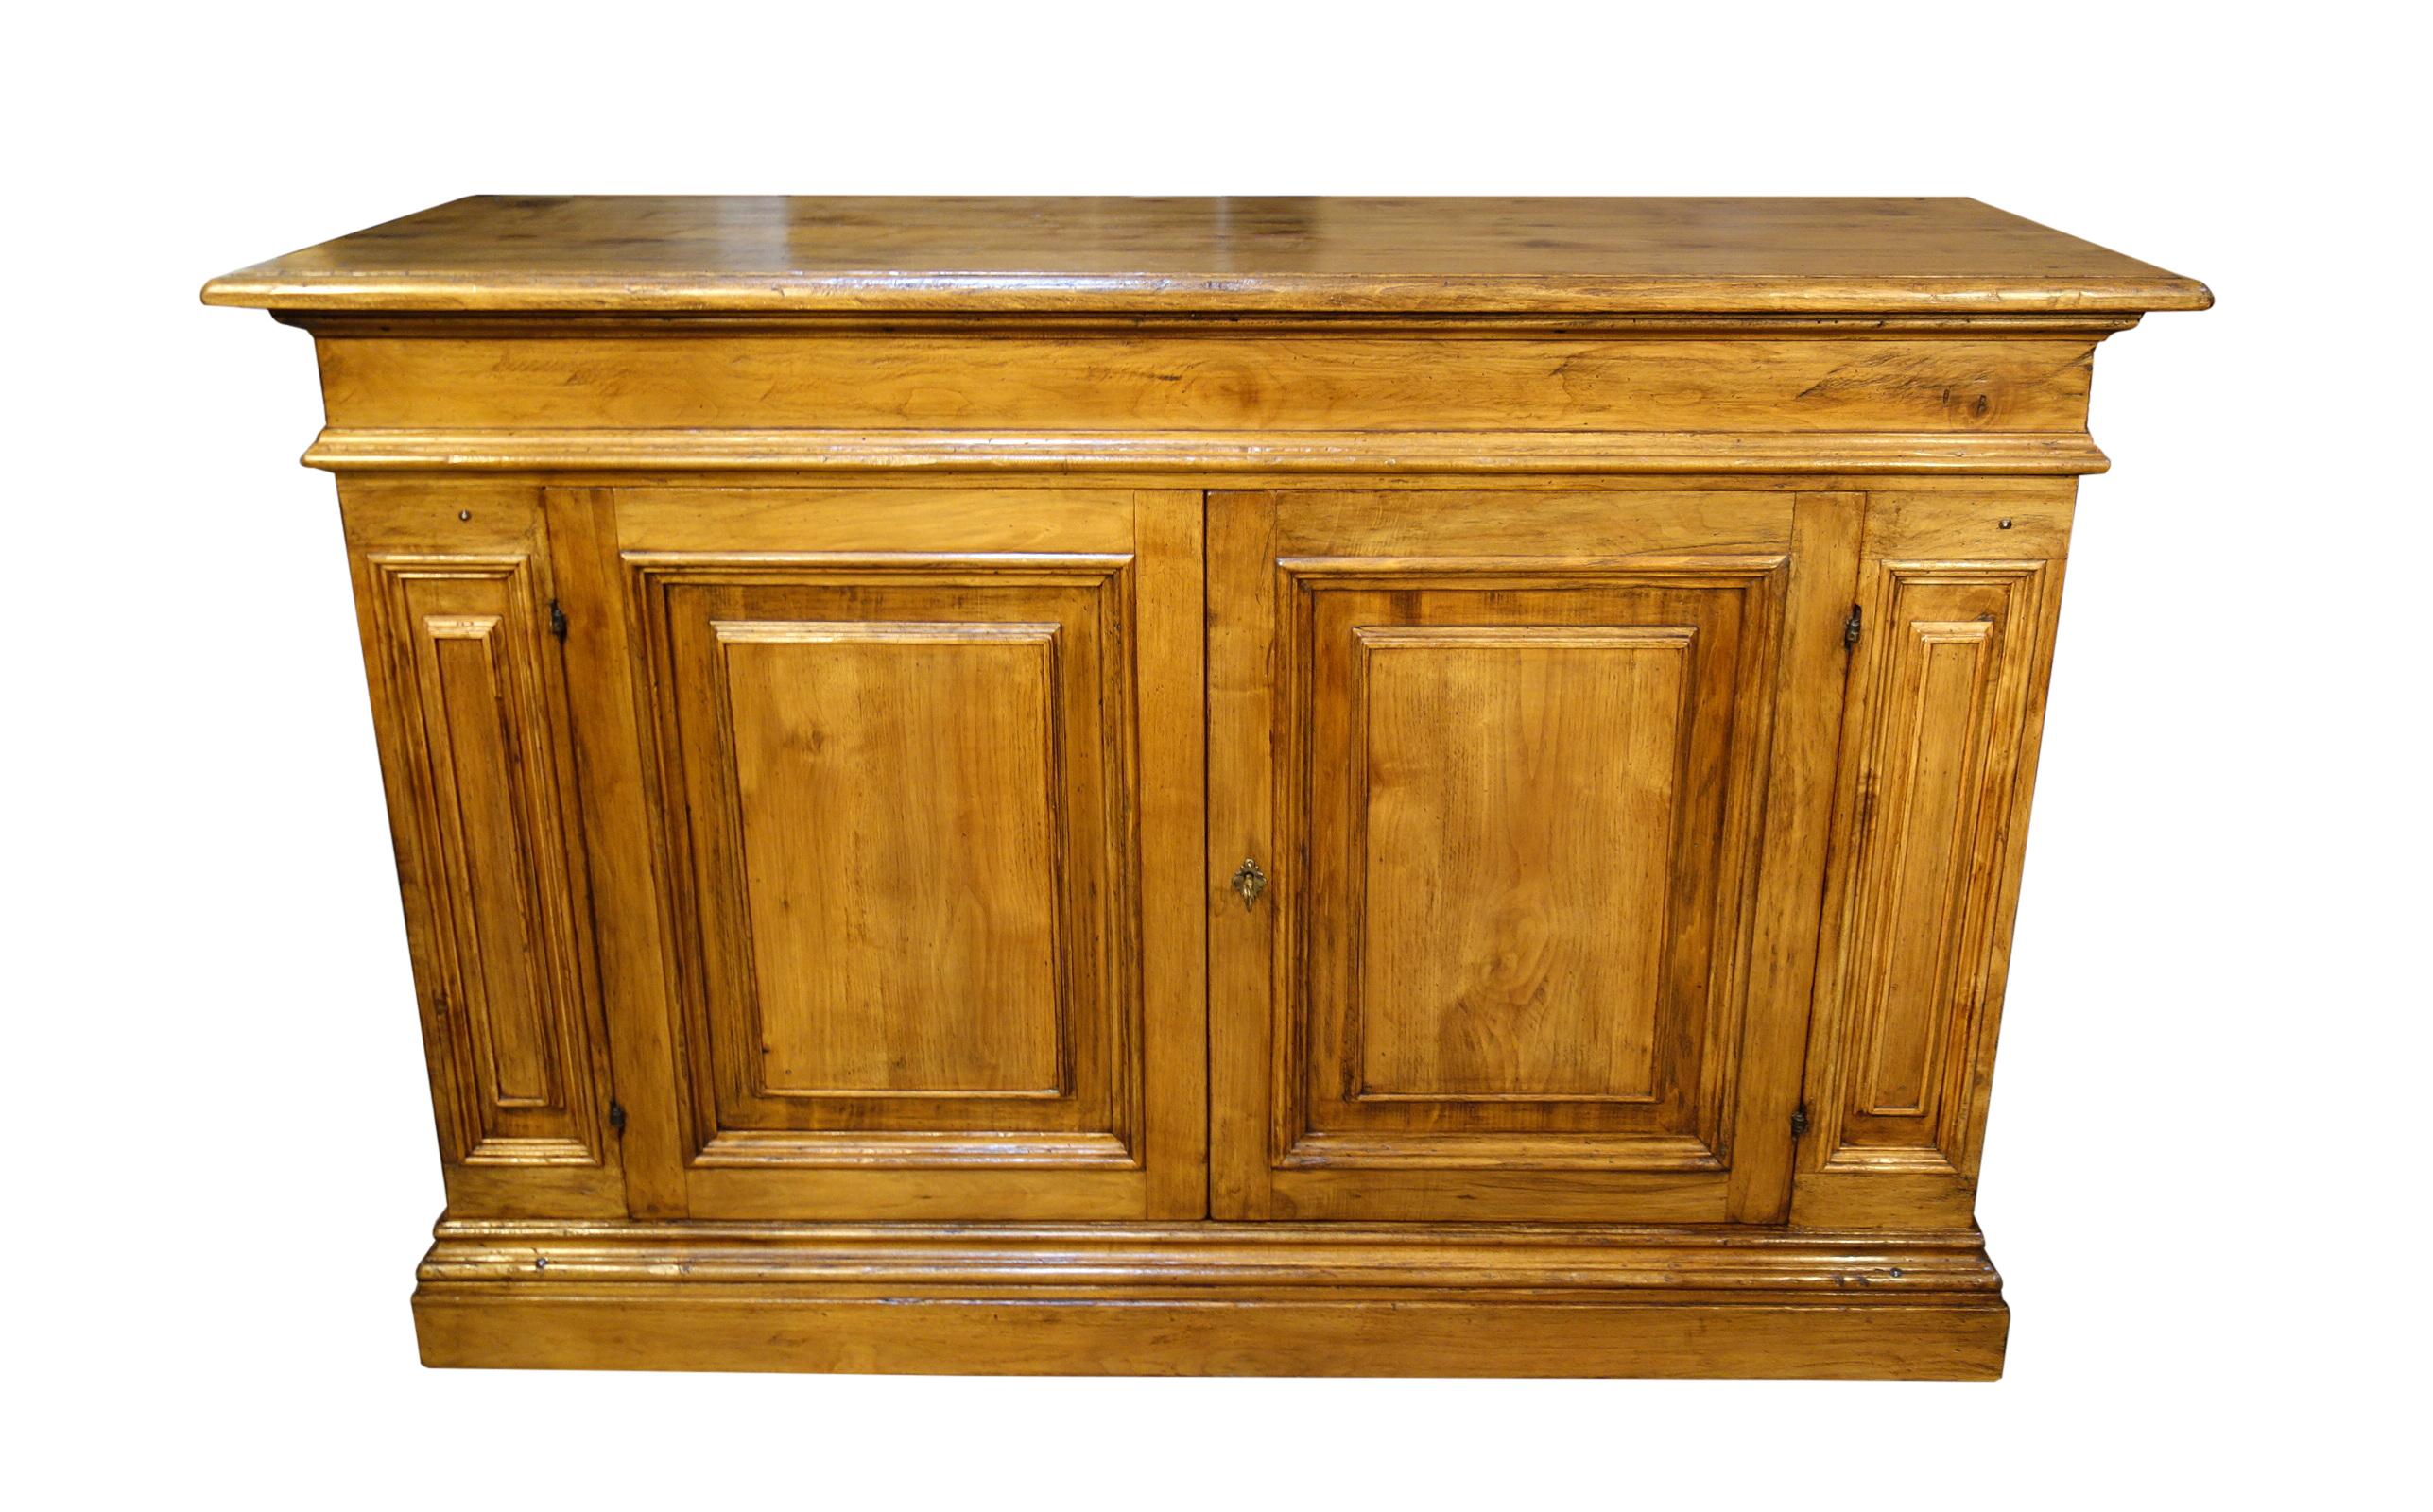 Baroque Revival 18th C Style ROMA Walnut Natural Finish Credenza Antique Reproduction In-Stock  For Sale